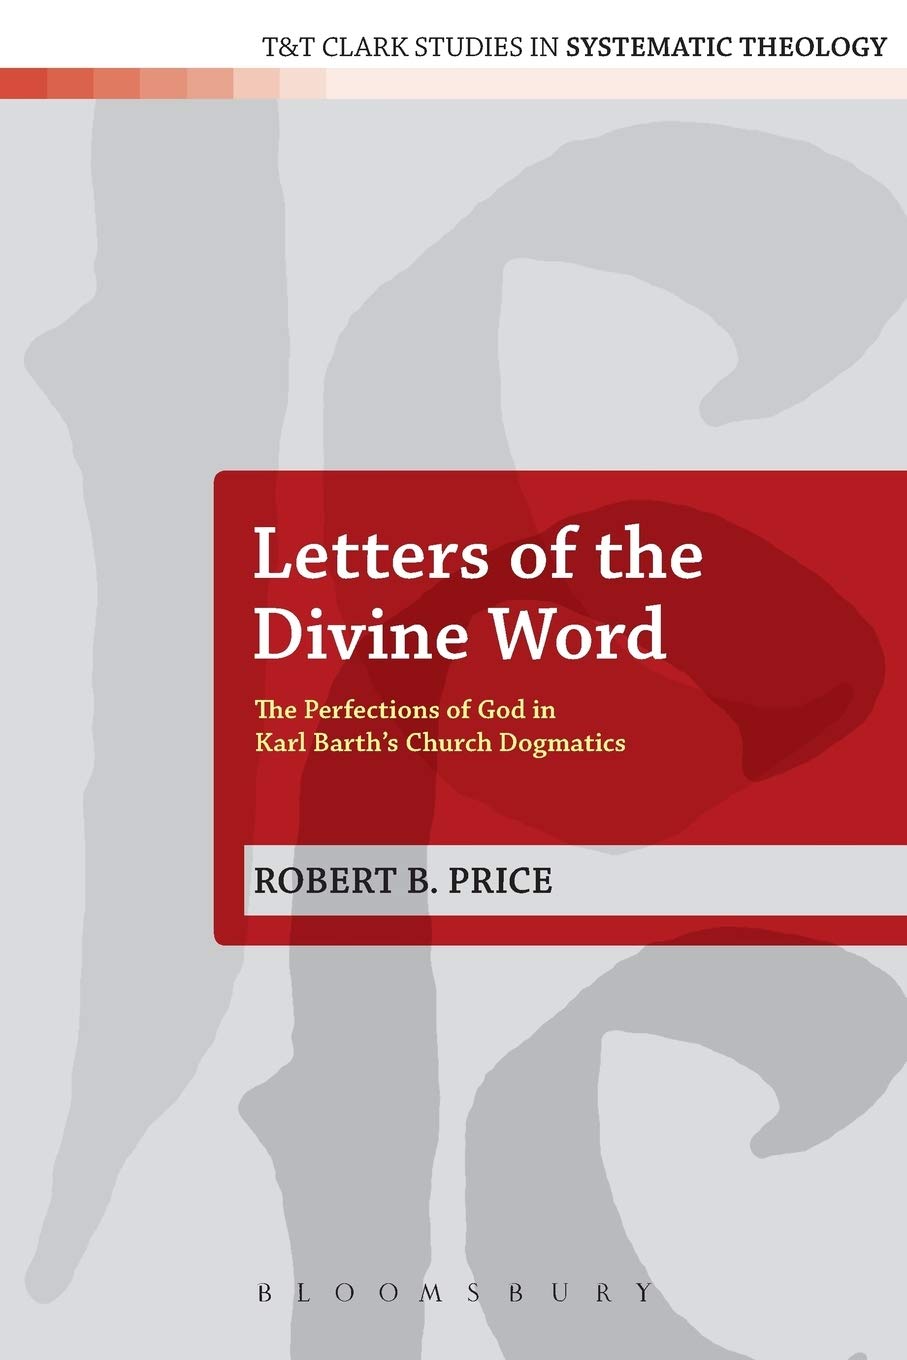 Letters of the Divine Word: The Perfections of God in Karl Barth's Church Dogmatics (T&T Clark Studies in Systematic Theology)